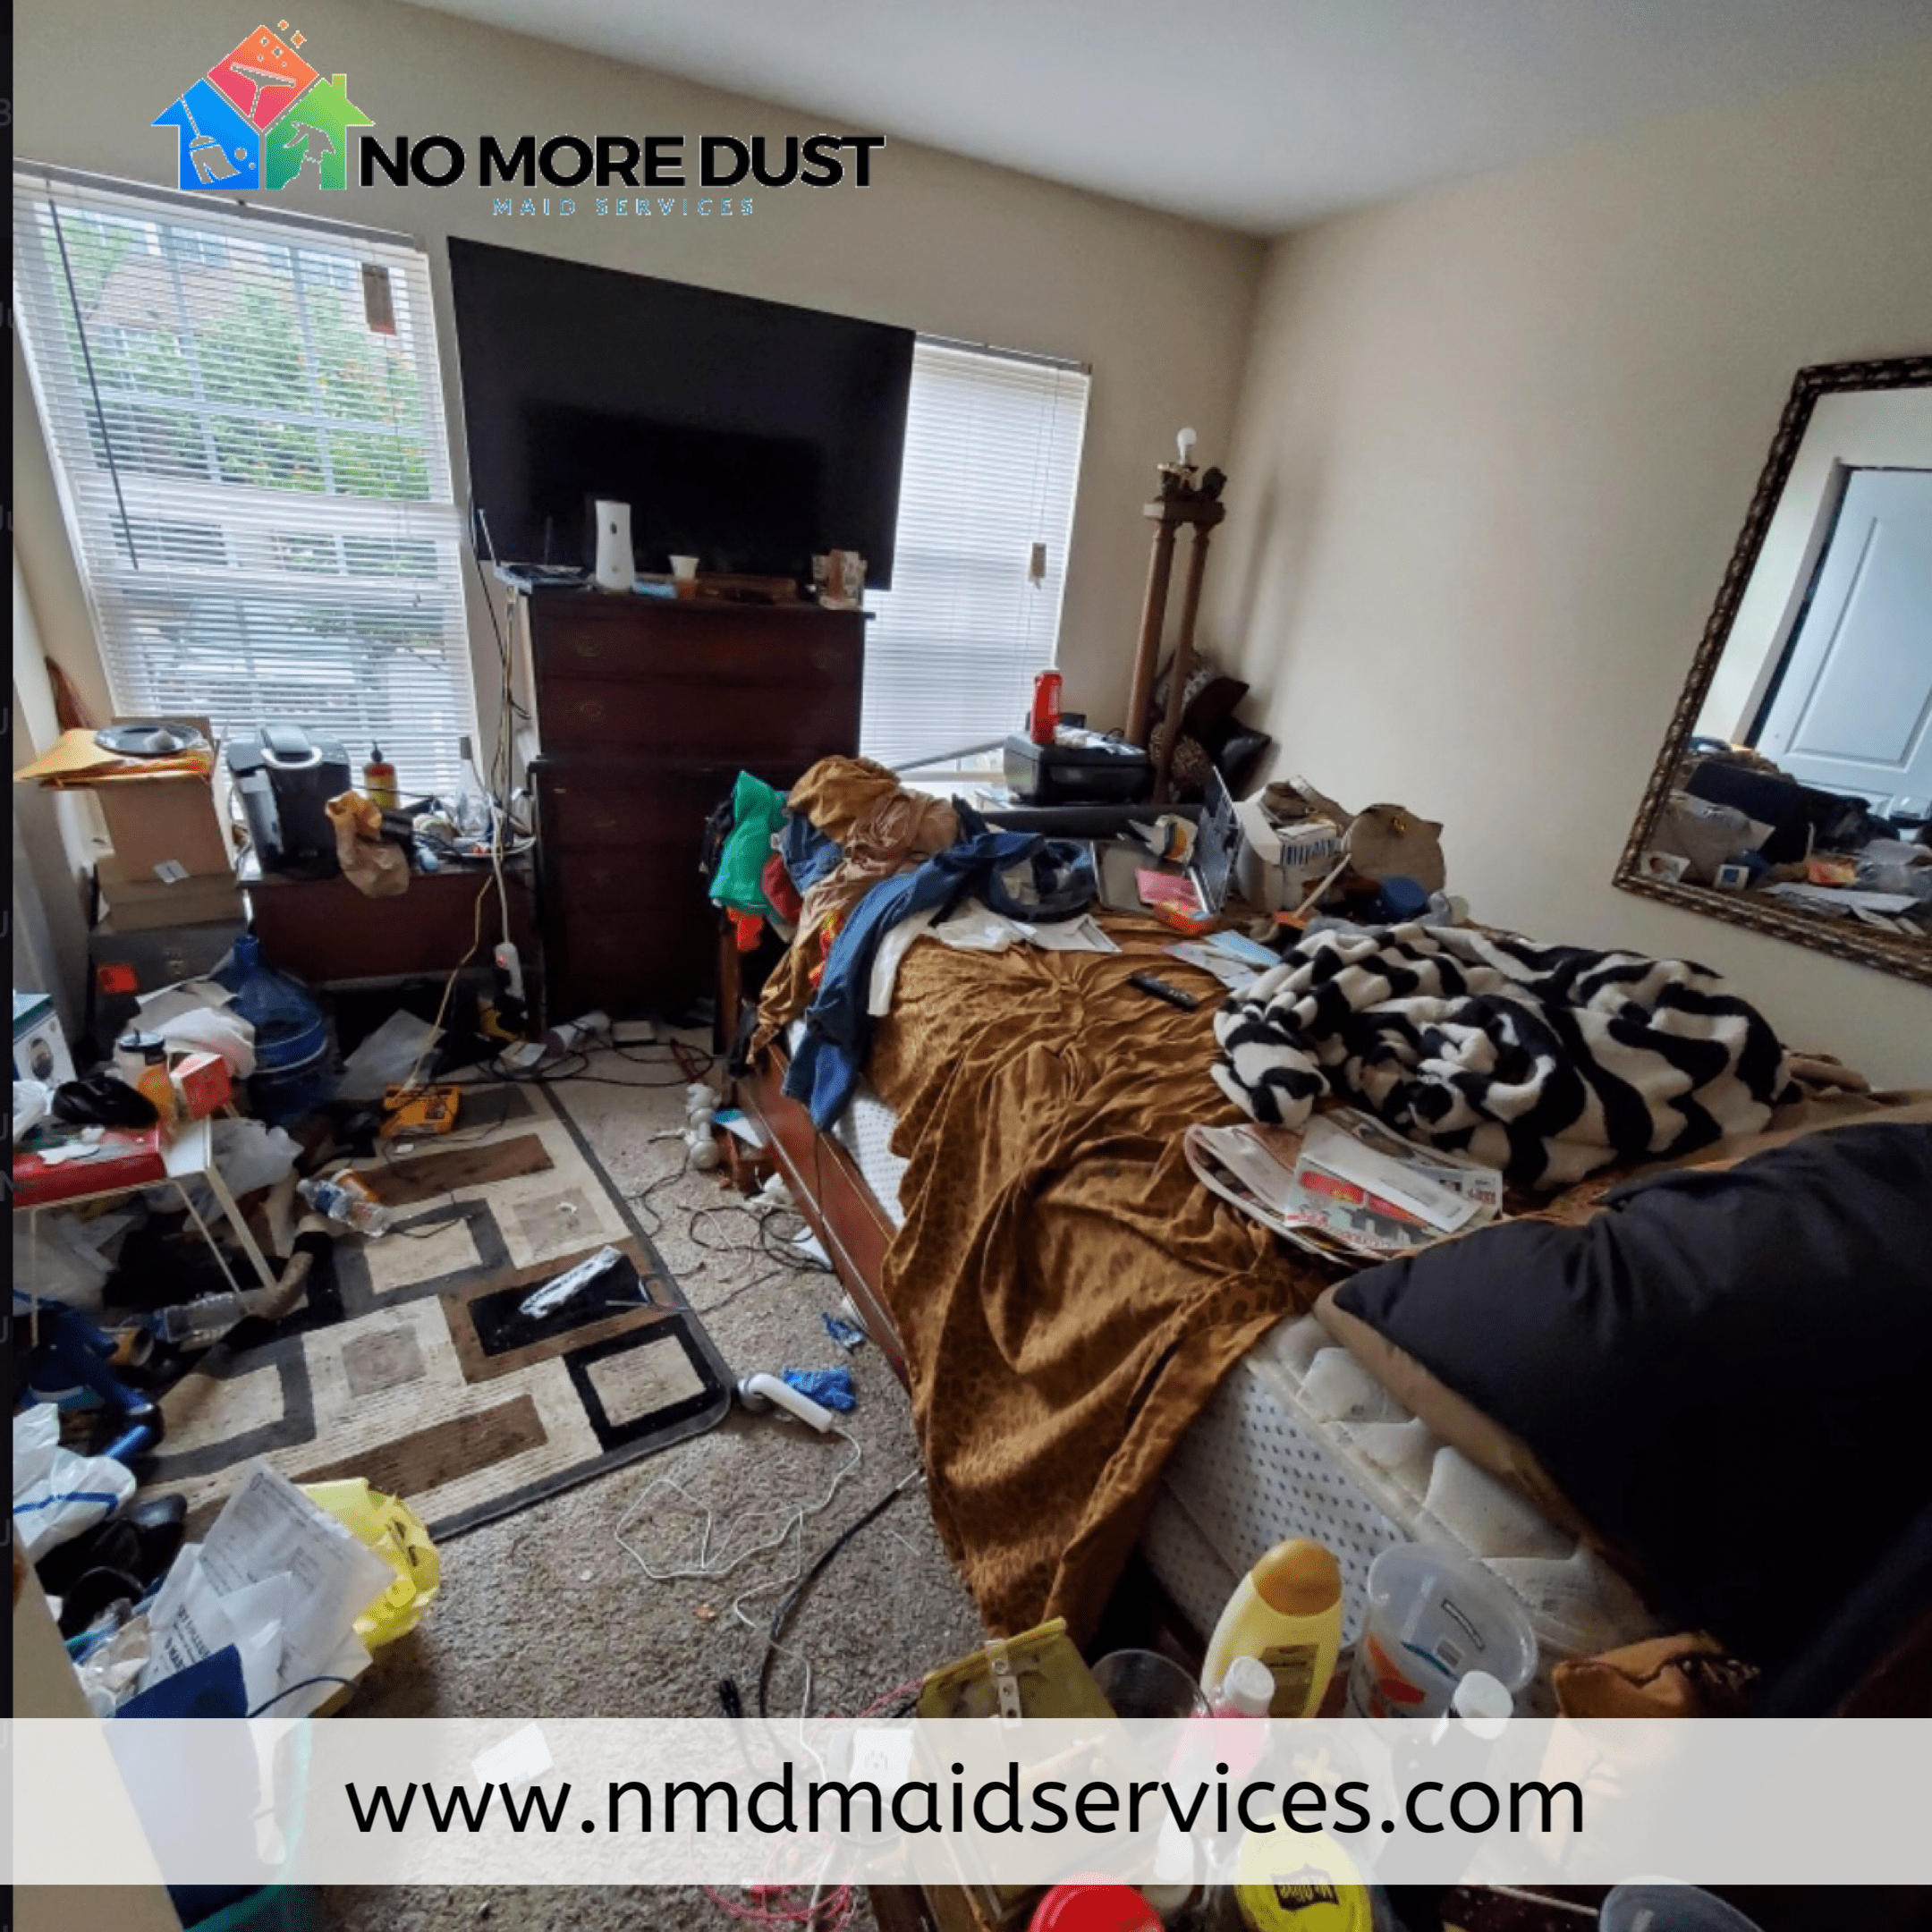 No More Dust Maid Services - Upper Marlboro, MD, US, home cleaning services